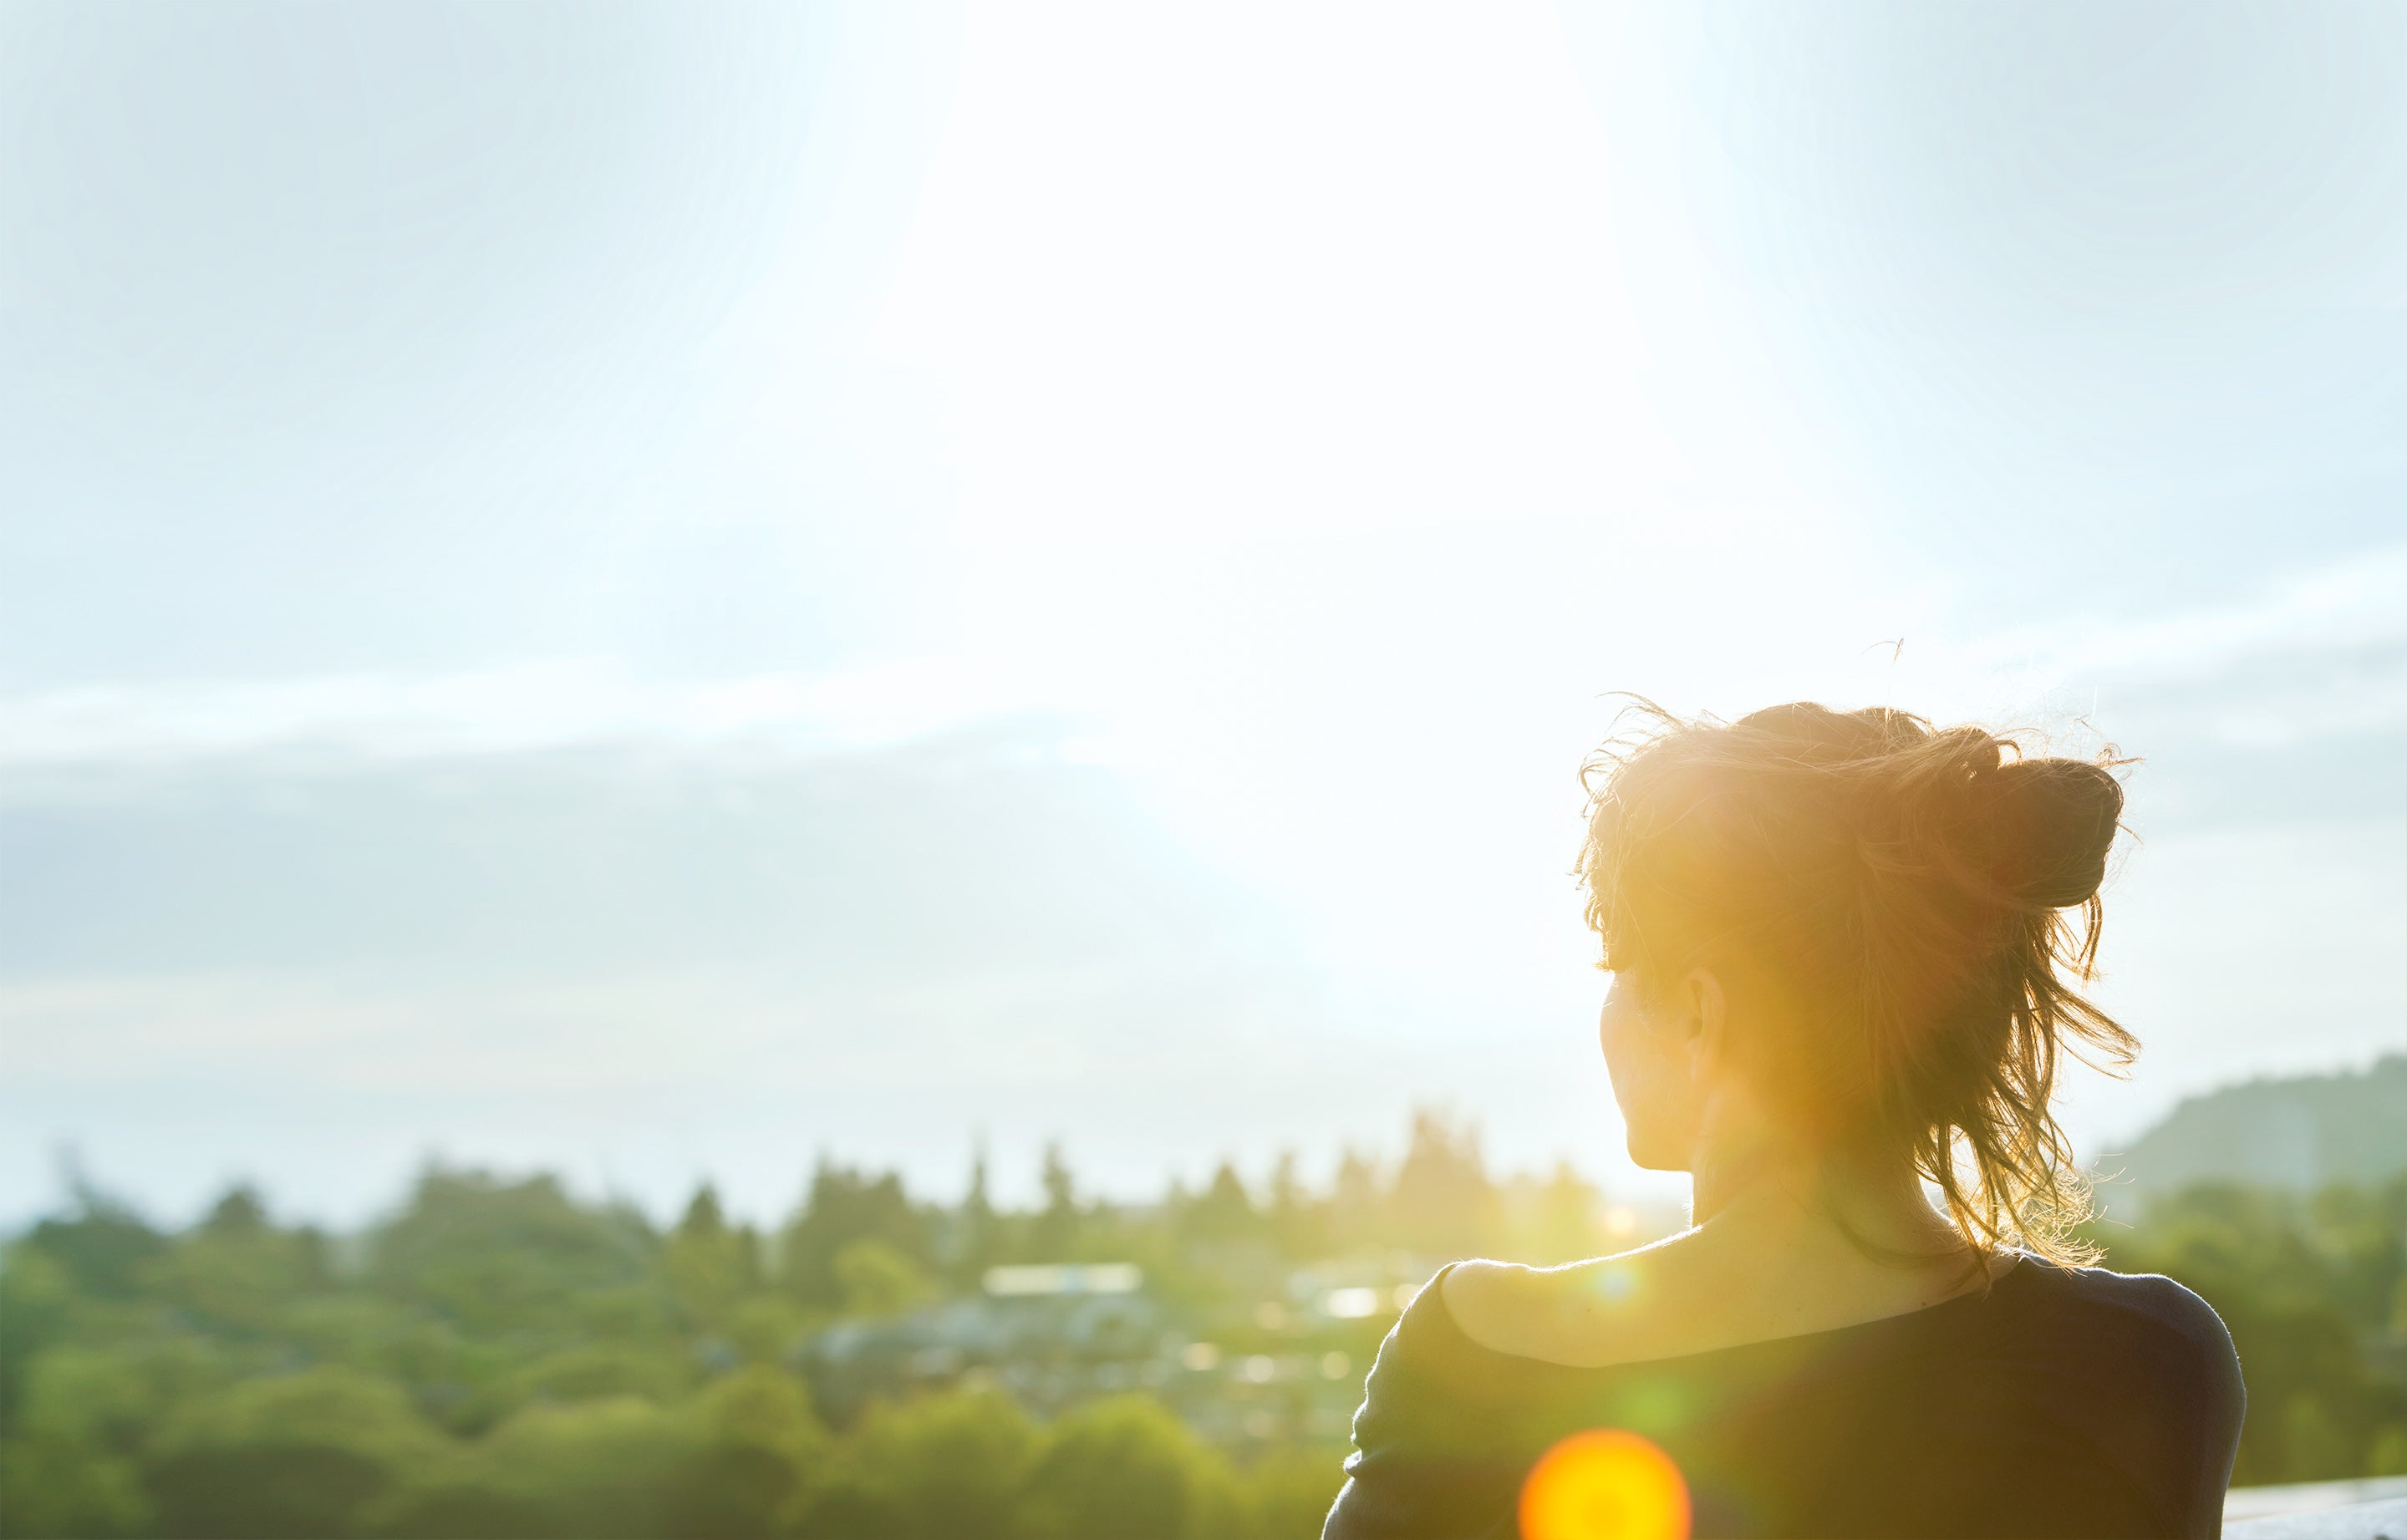 A woman on a viewpoint looking over a forested urban area in bright sunlight.